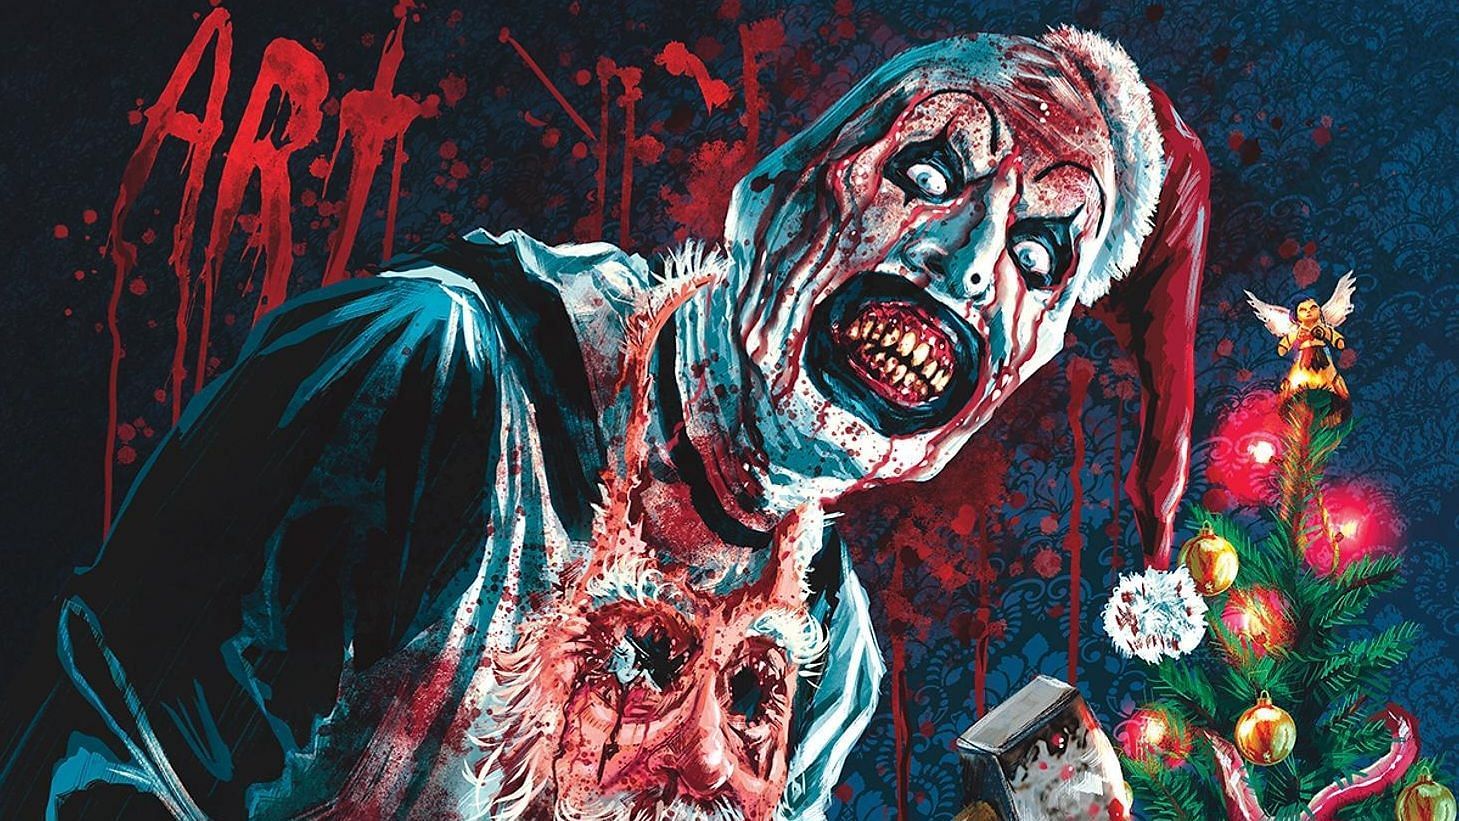 Art the Clown from the official poster for Terrifier 3